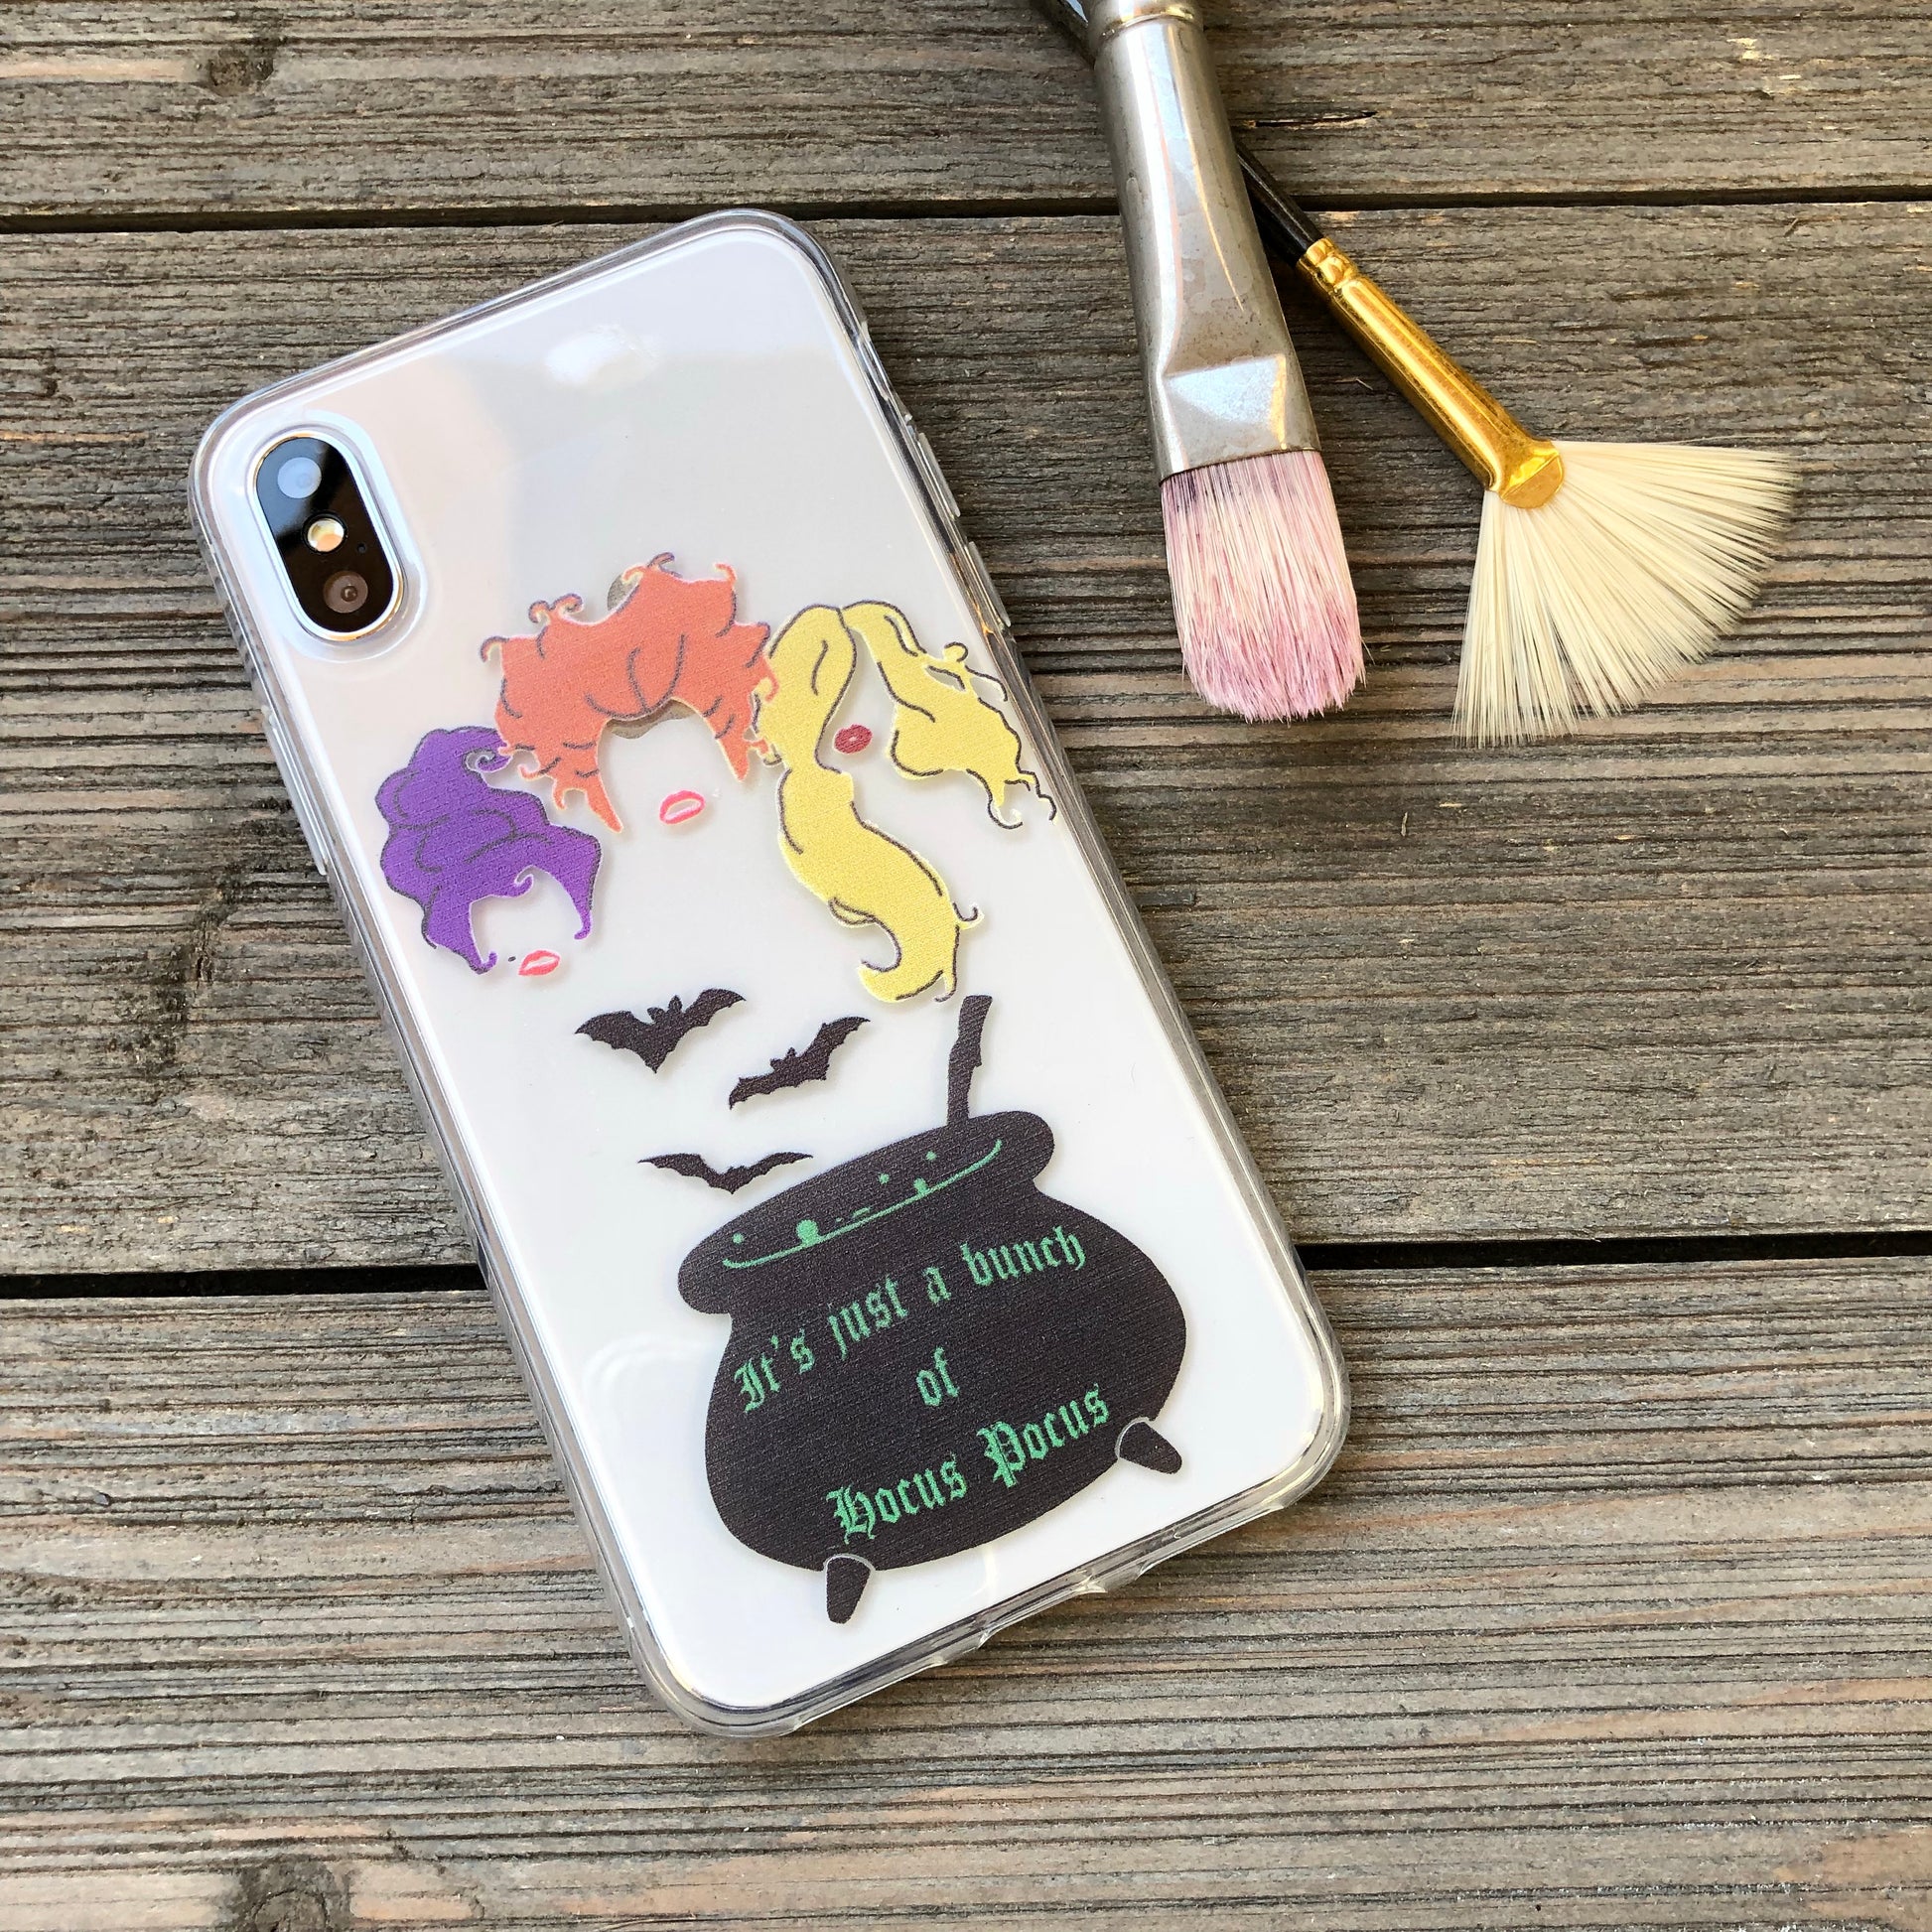 witchcraft theme iphone case